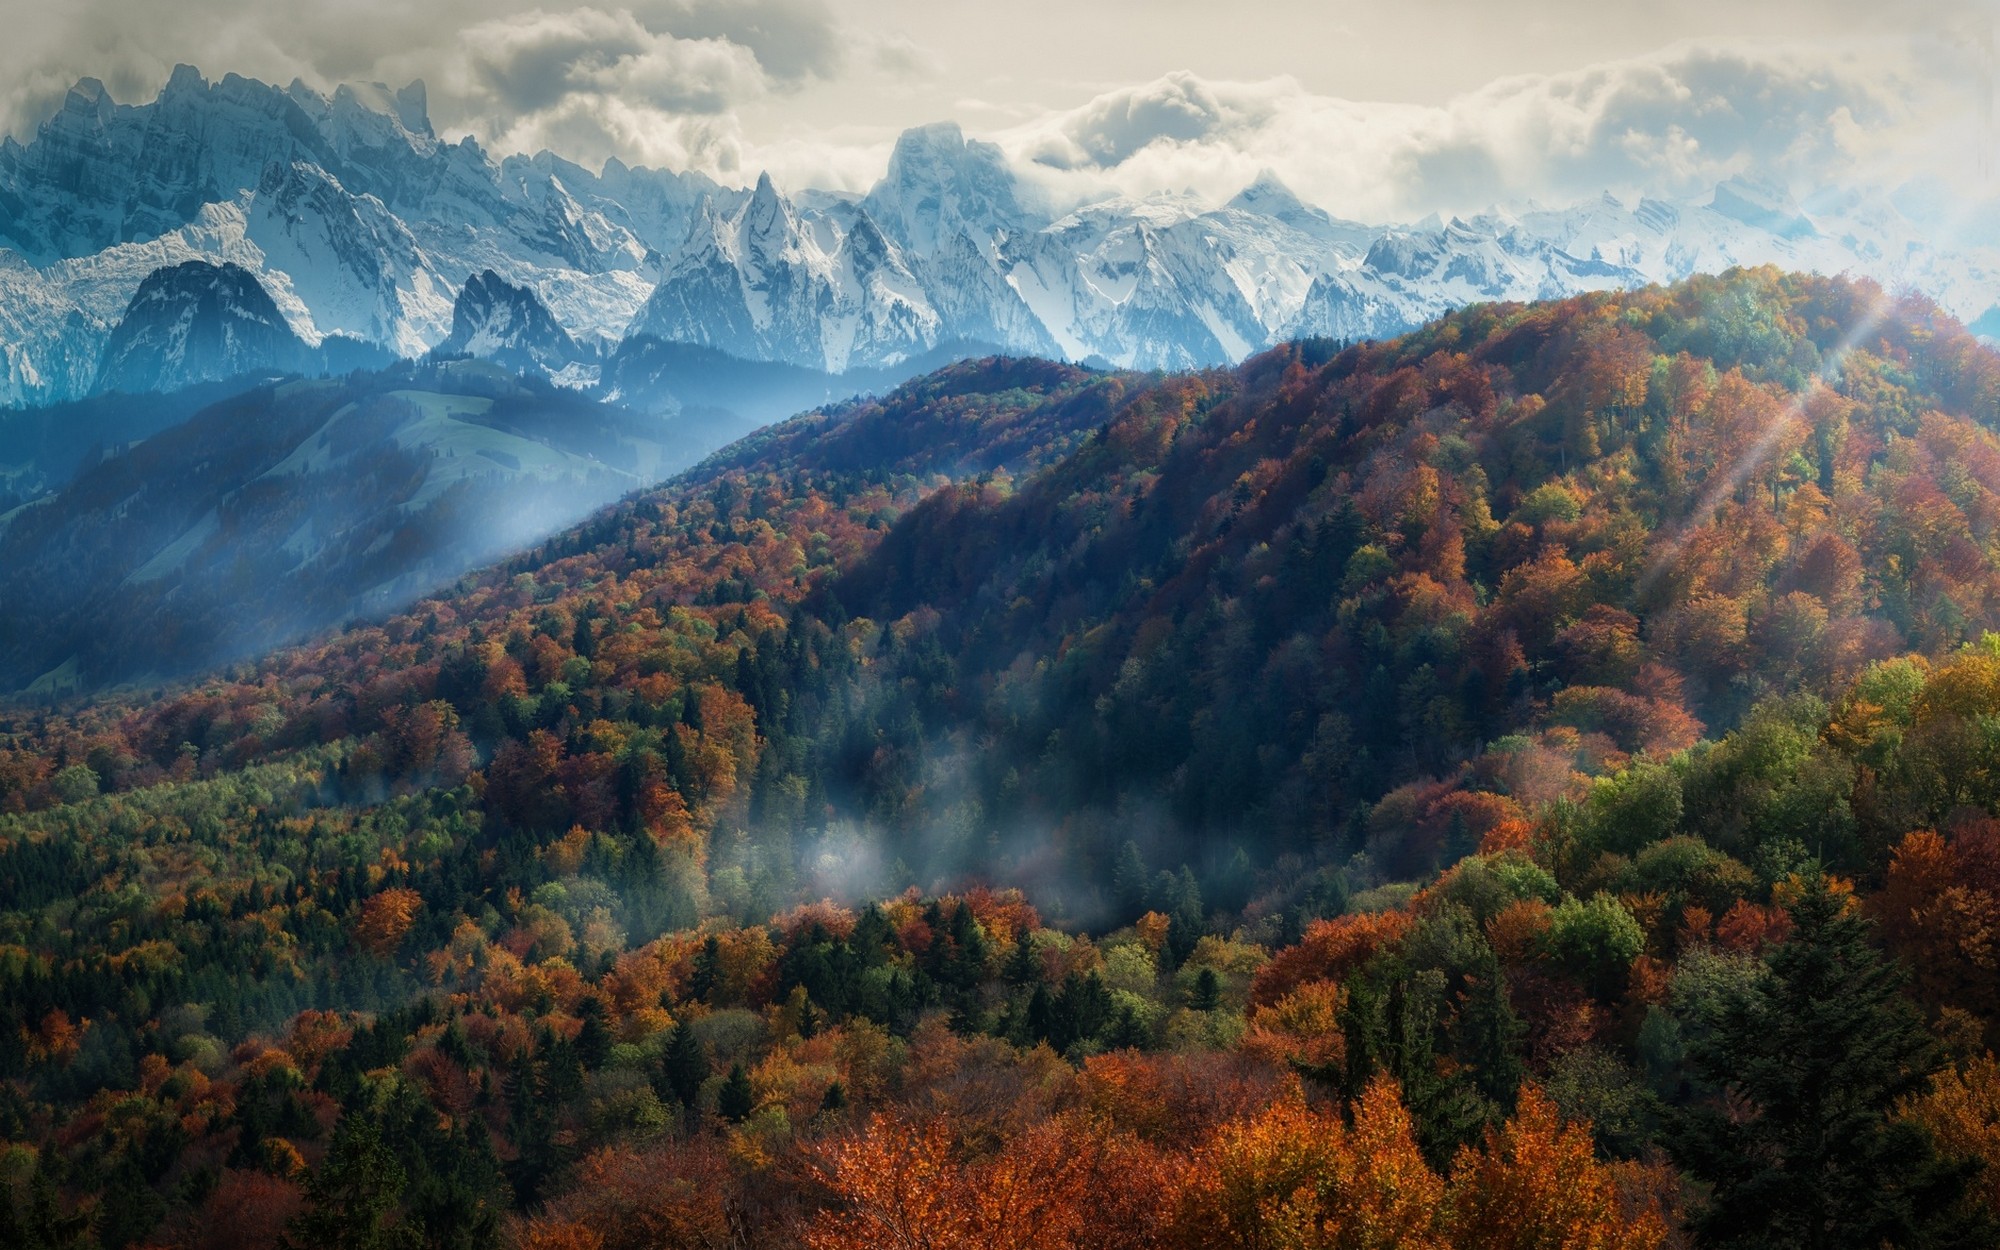 General 2000x1250 nature landscape mountains forest fall mist trees Alps snowy peak clouds sun rays morning 4K